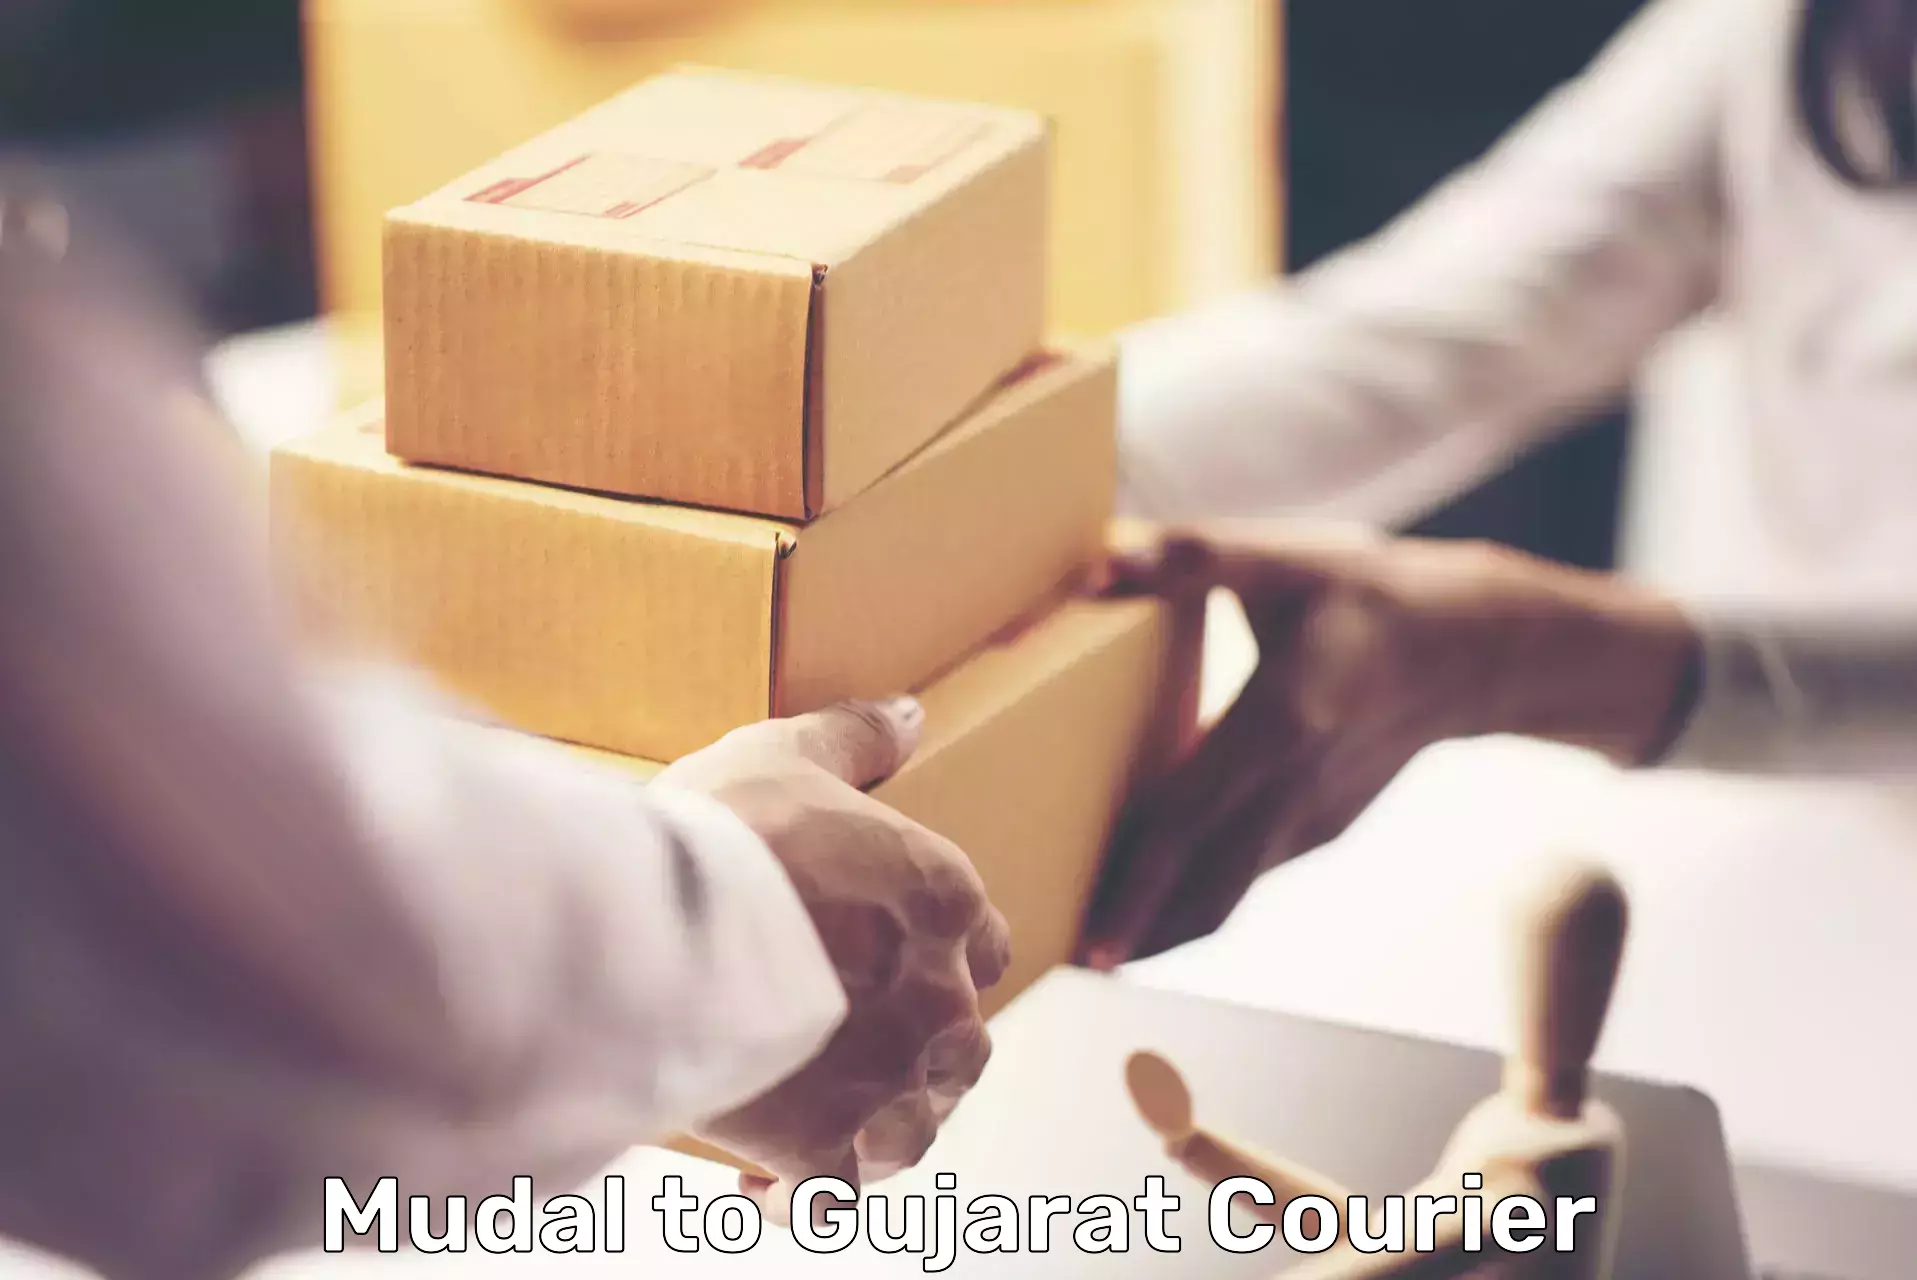 Global courier networks Mudal to Hazira